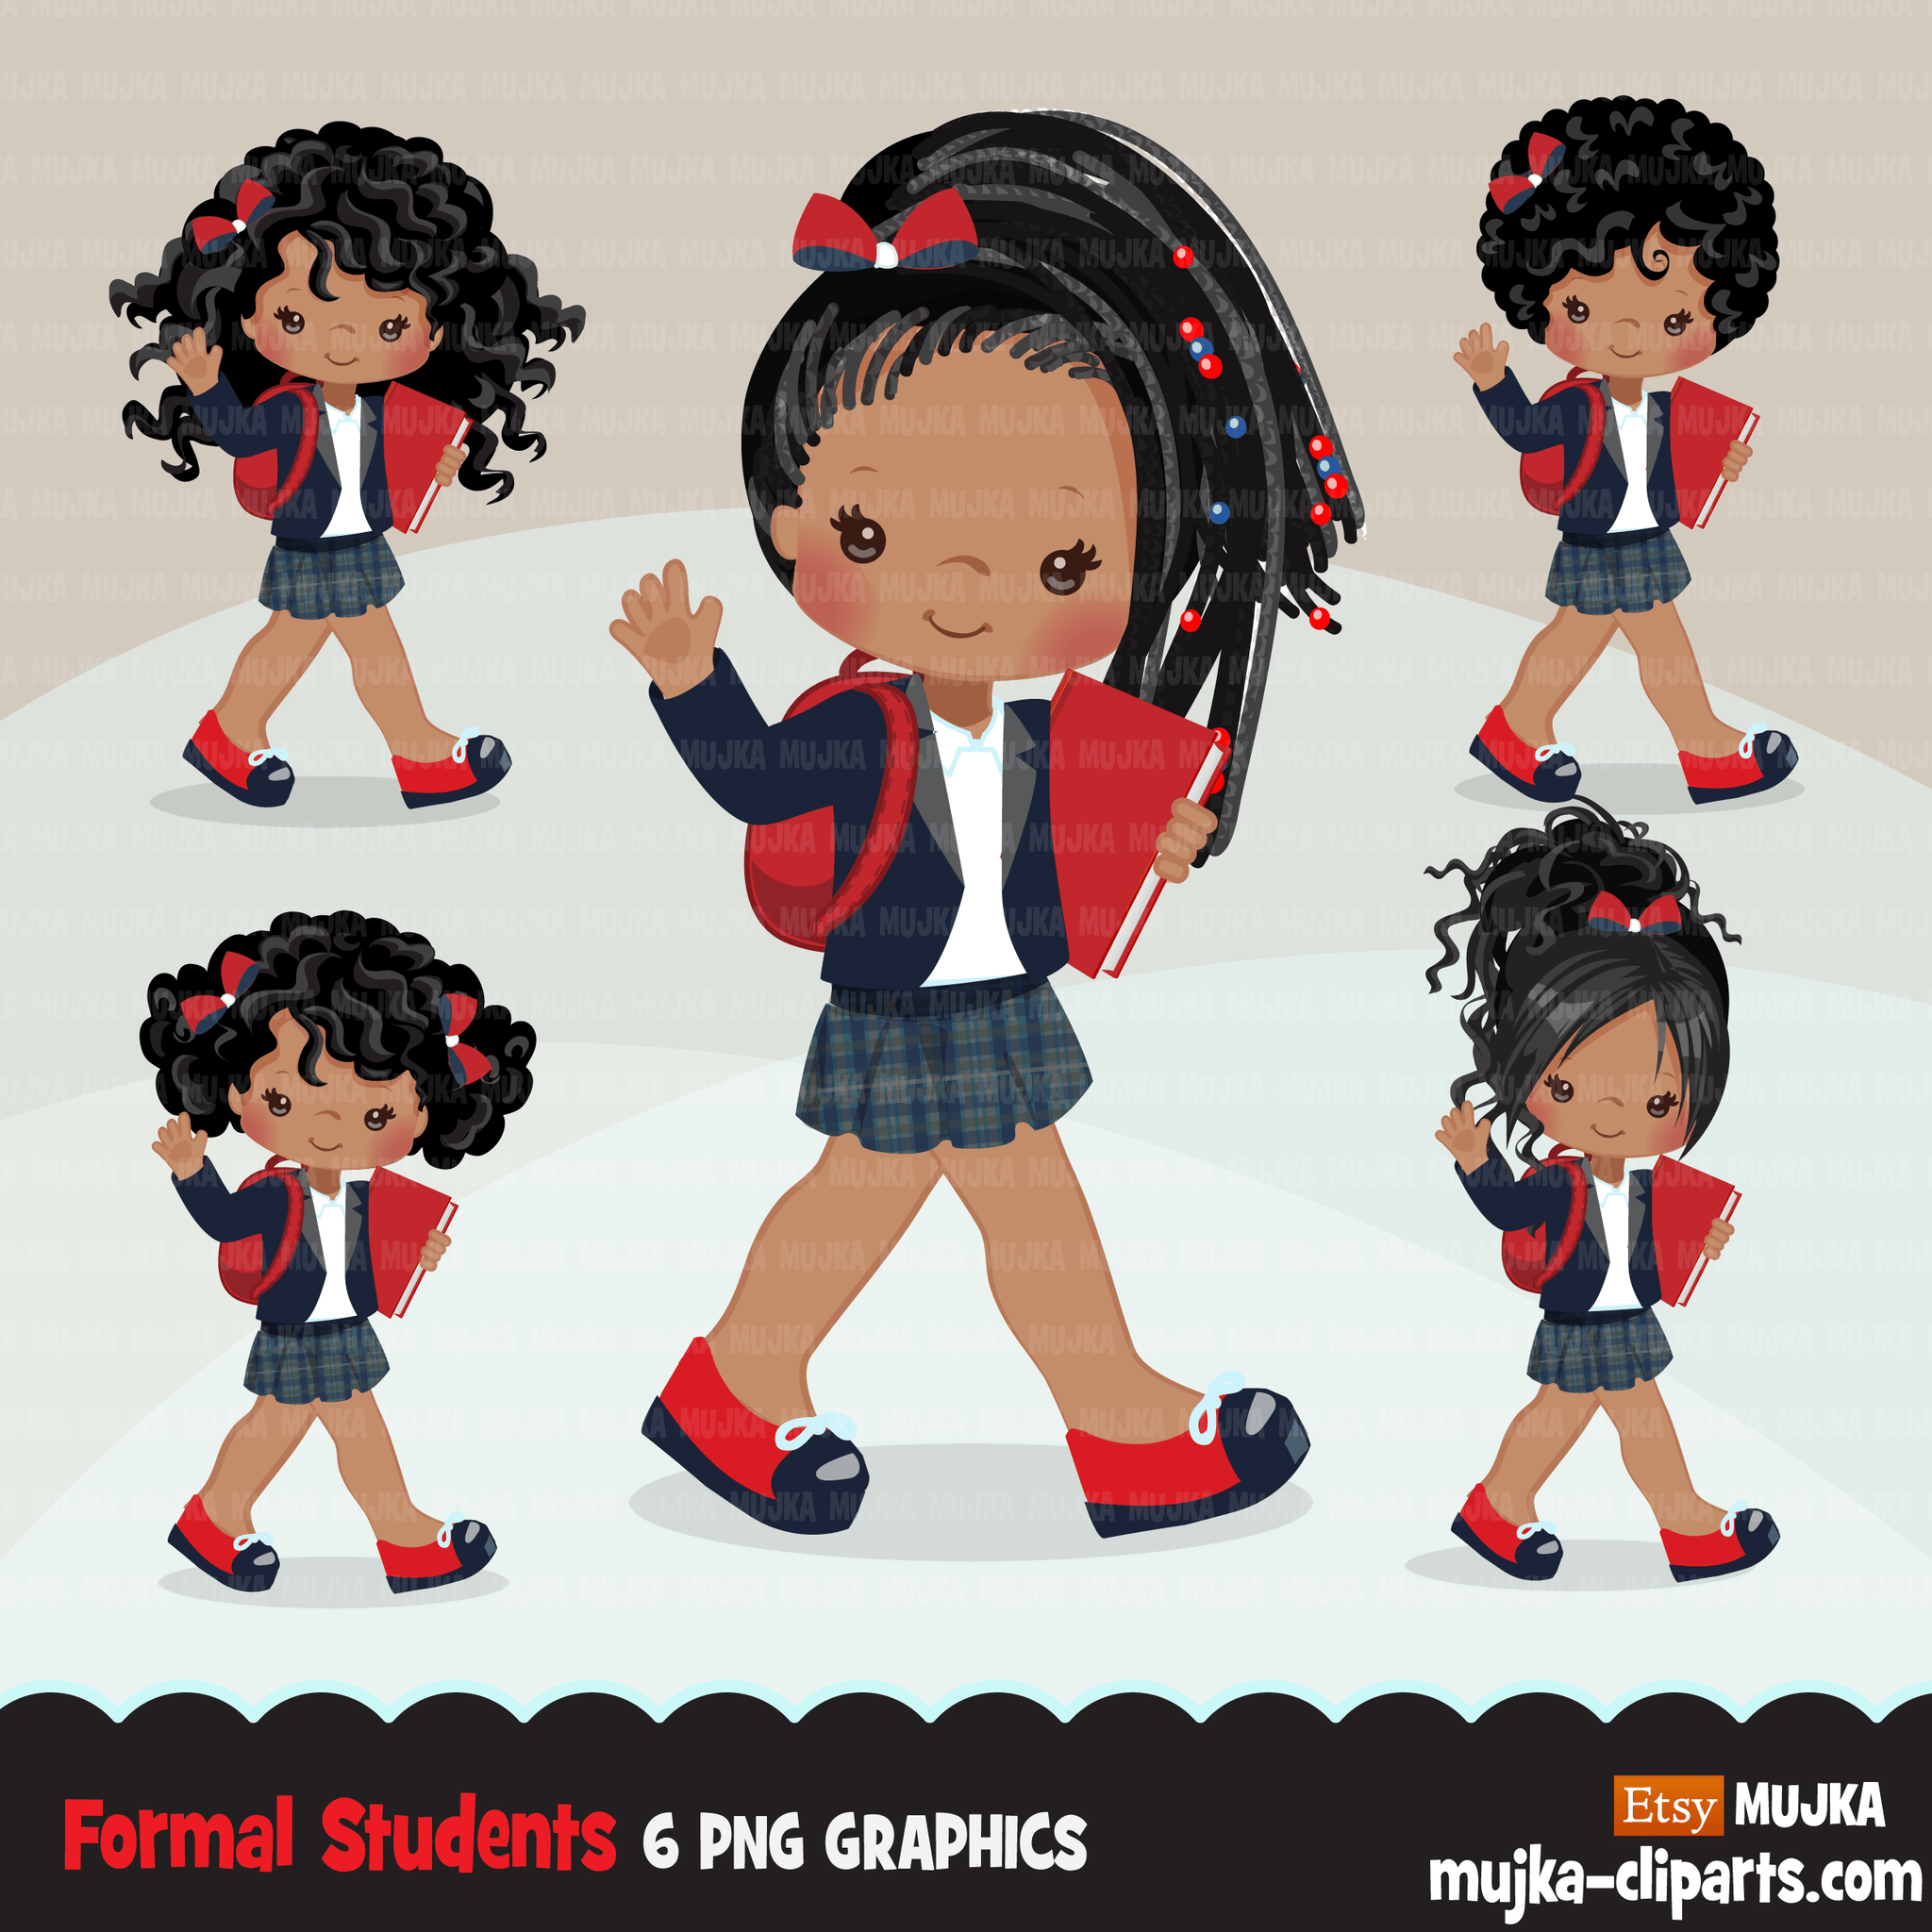 Formal black Student clipart, Black Back to School girl character graphics, clip art planner stickers, embroidery, activity, education, teaching